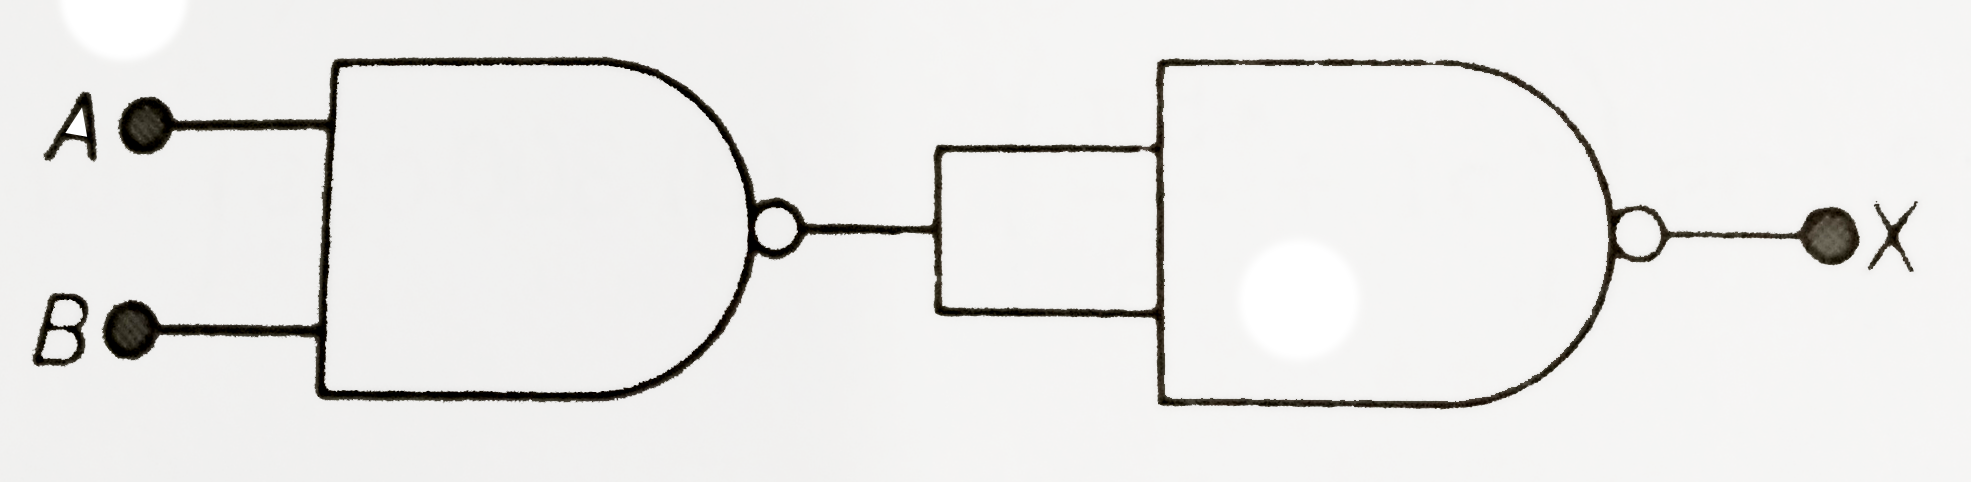 The output (X) of the logic circuit shown in figure will be